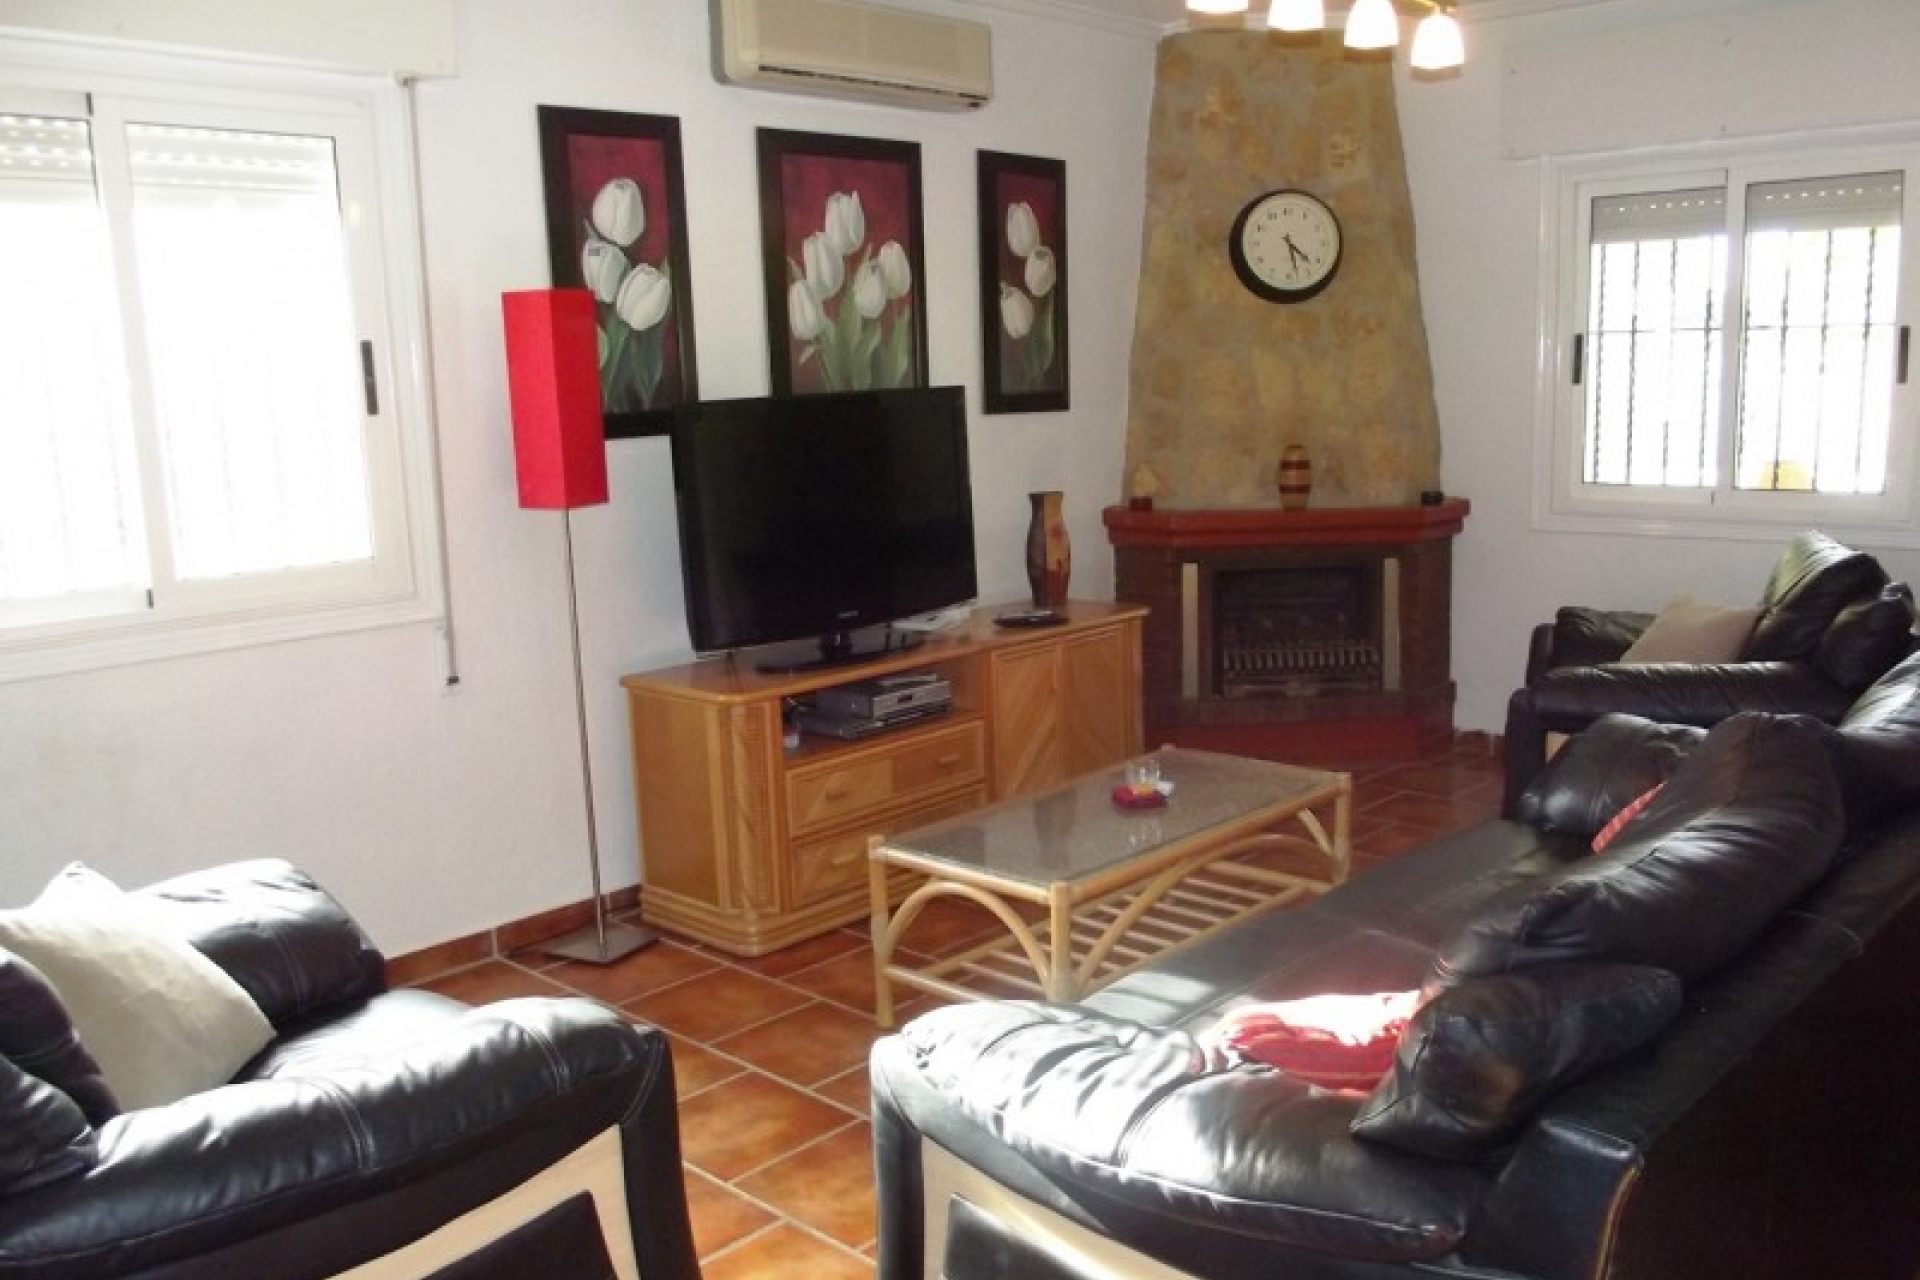 For sale cheap bargain property Spain costa blanca